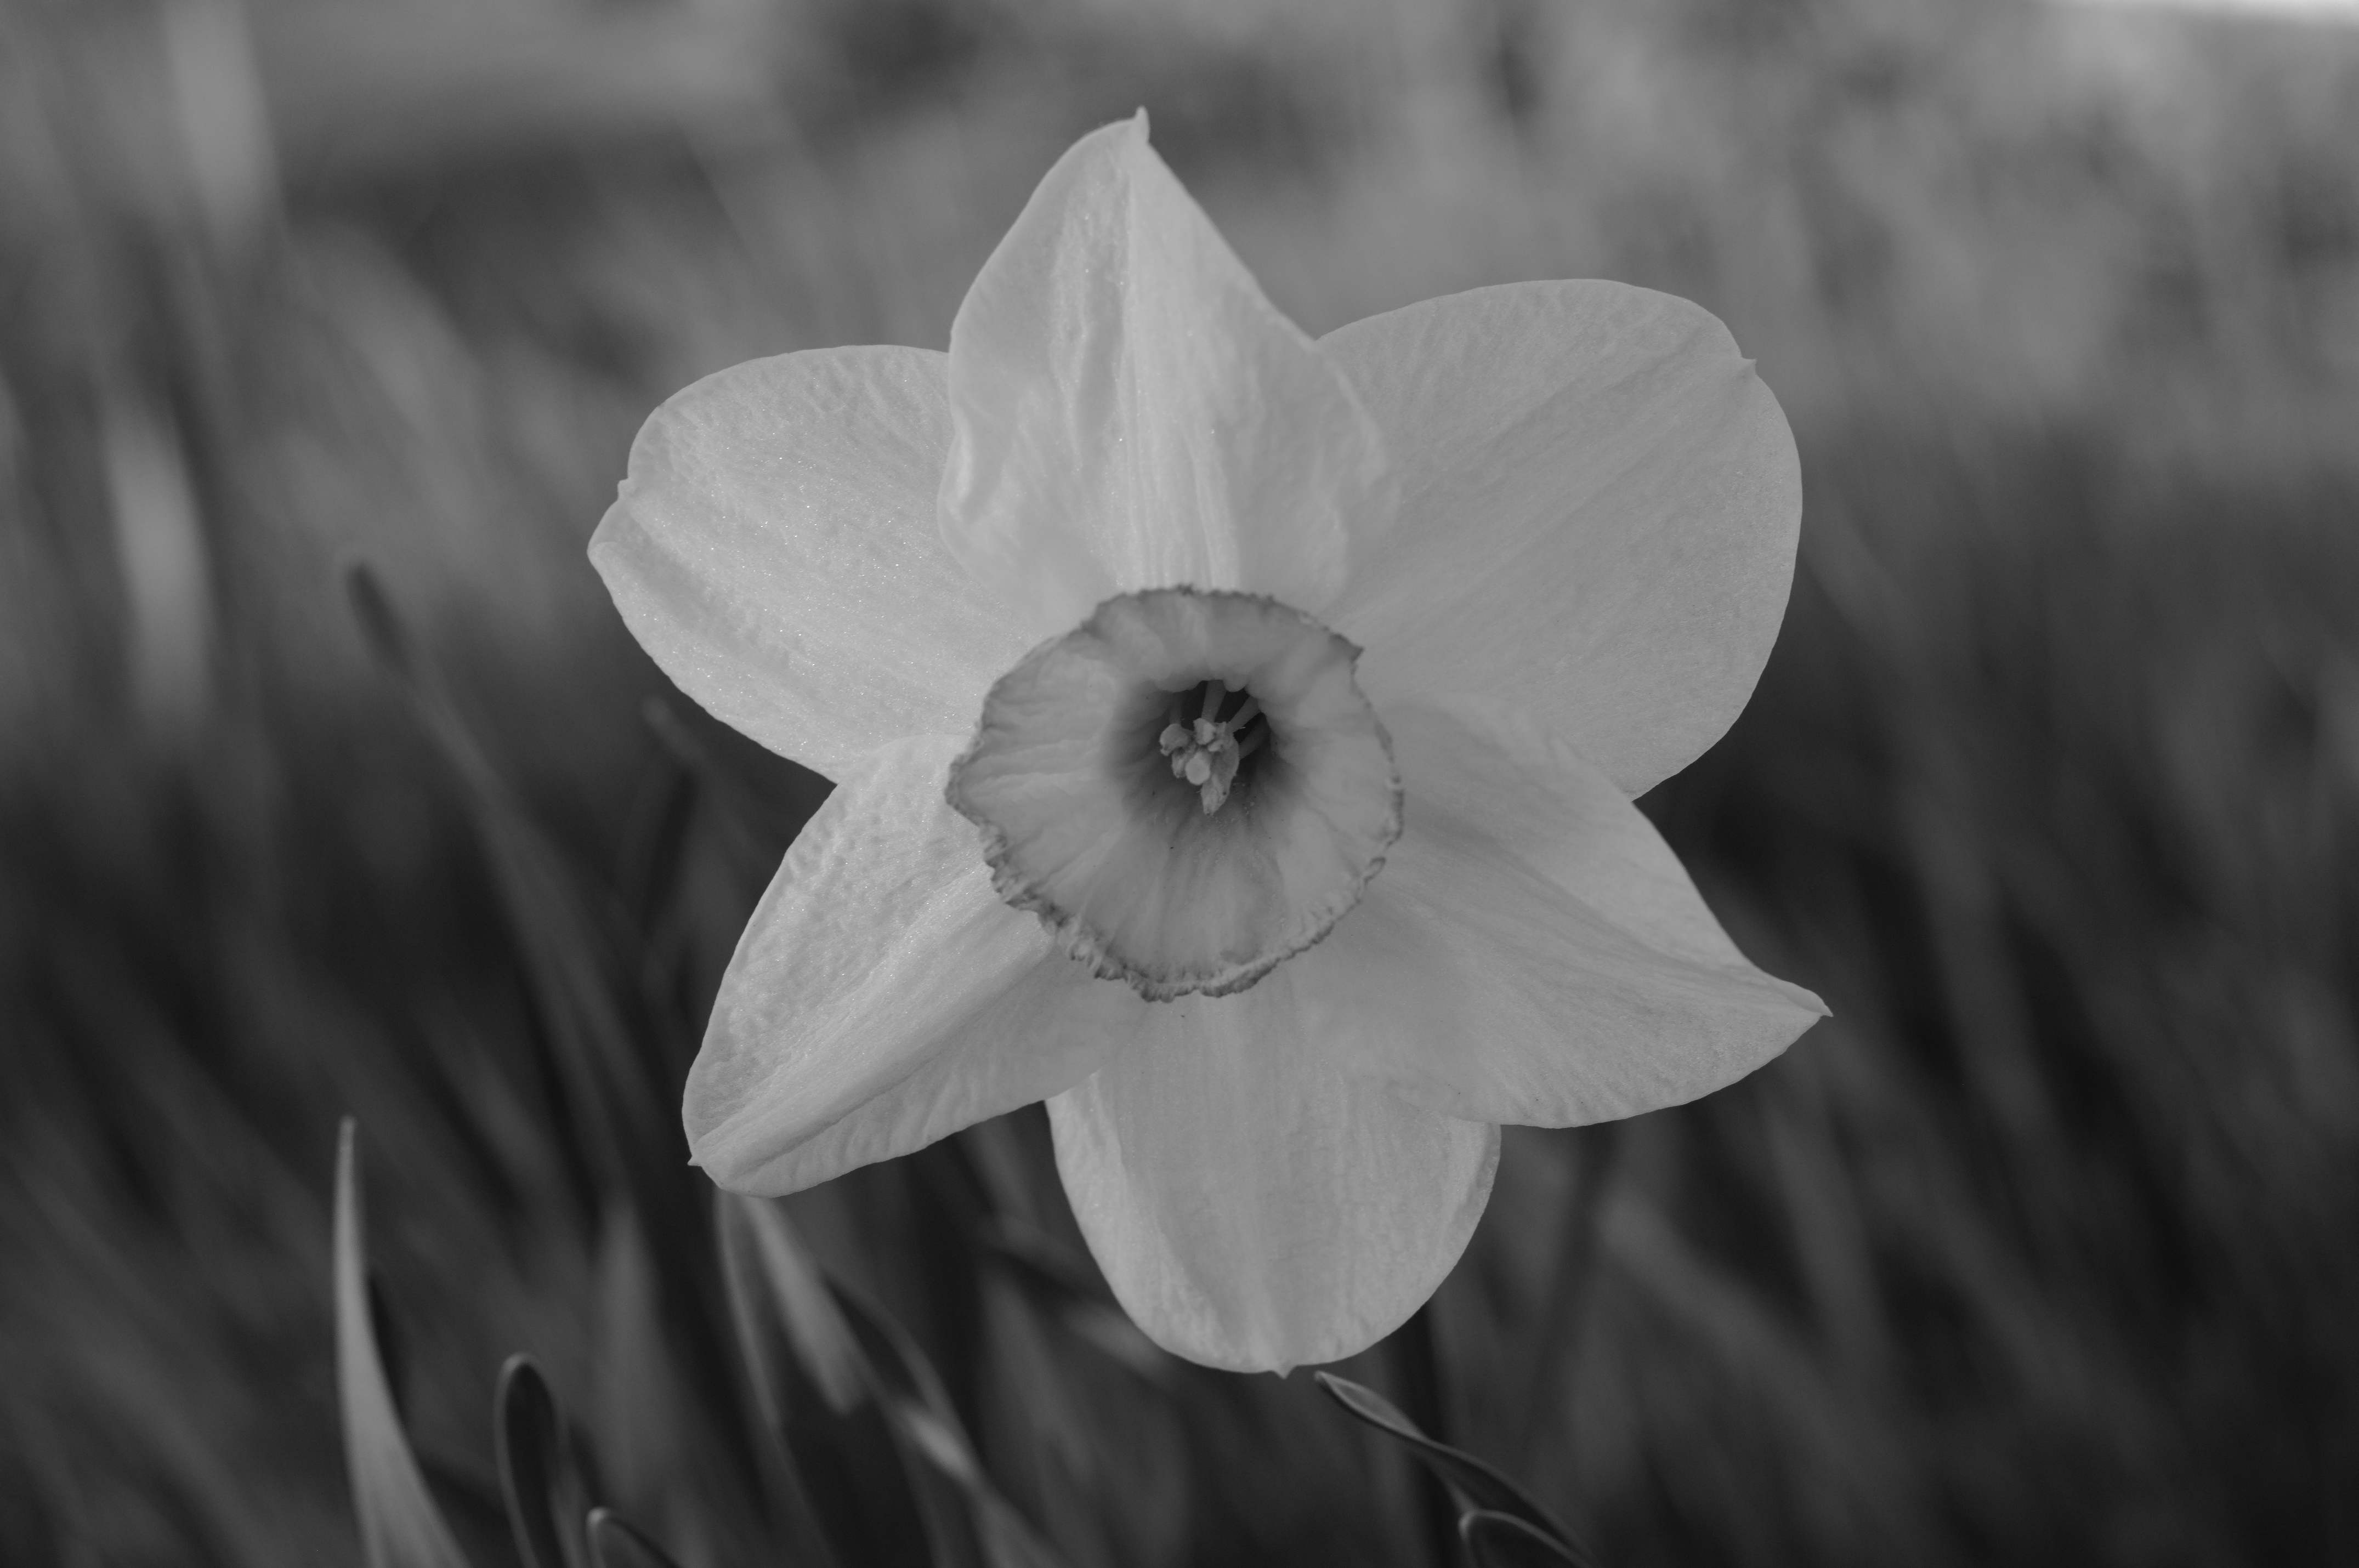 Flower. Samt picture as above, but converted to black and white [Photo: Henrik Hemrin]